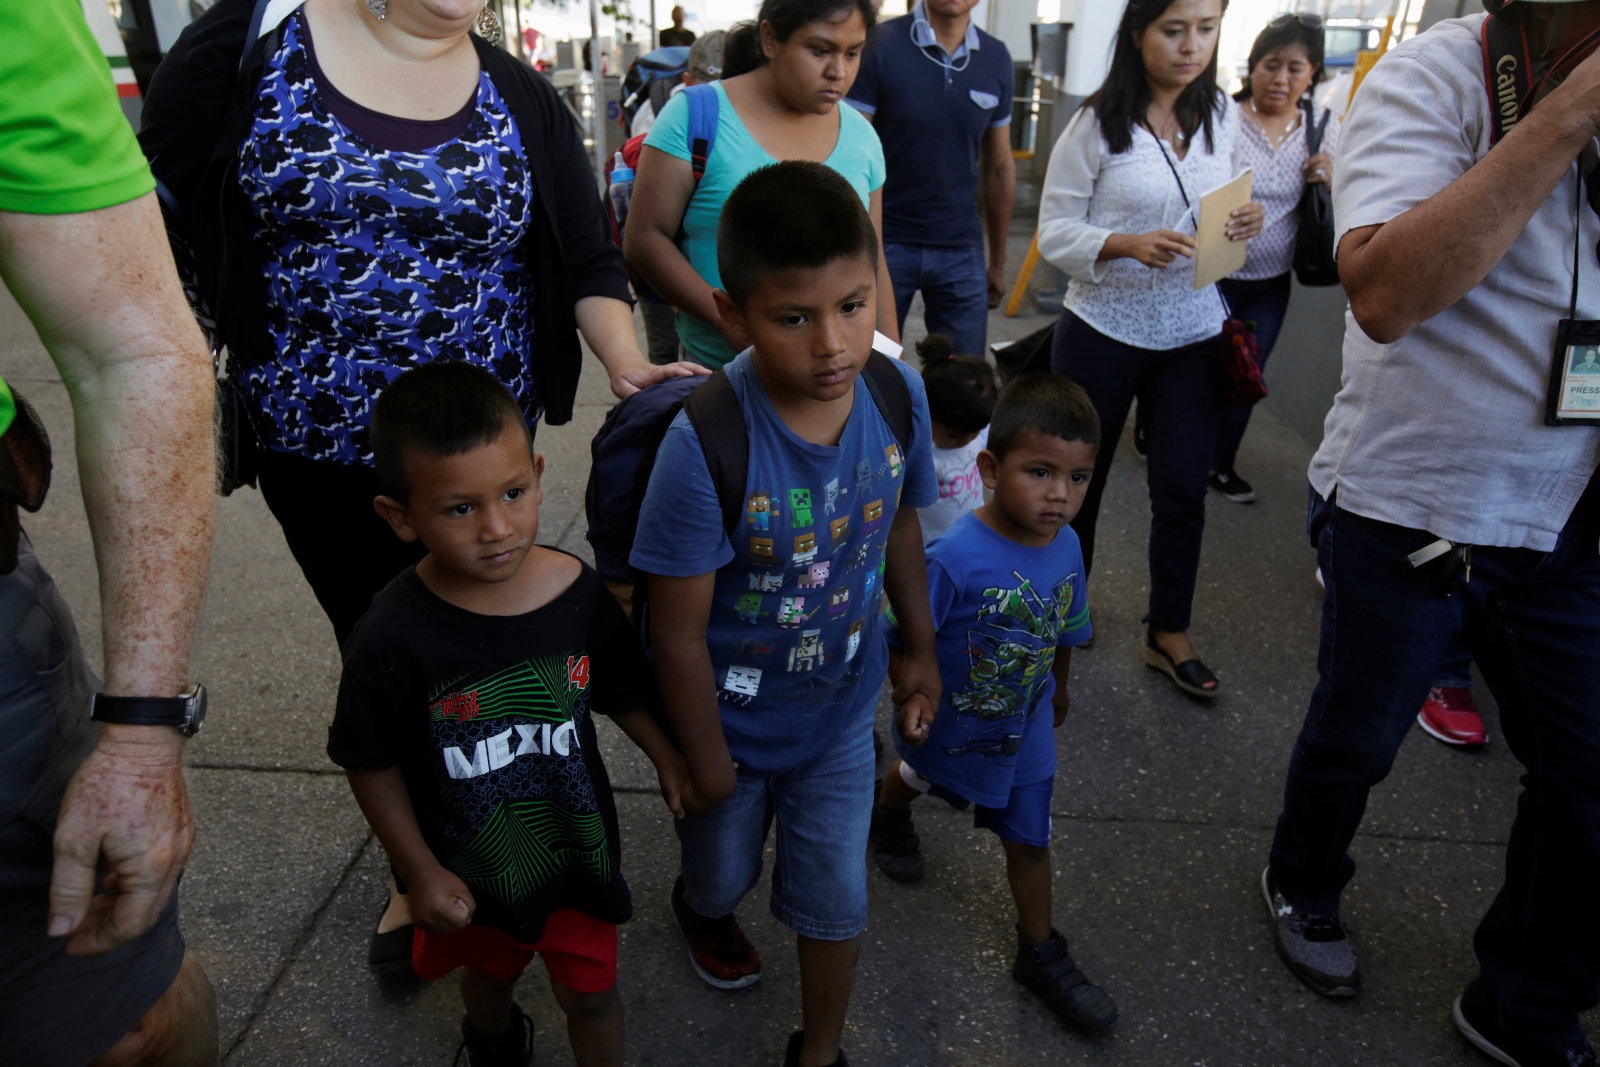 California Rep. requests 23andMe to help reunite children with families | DeviceDaily.com